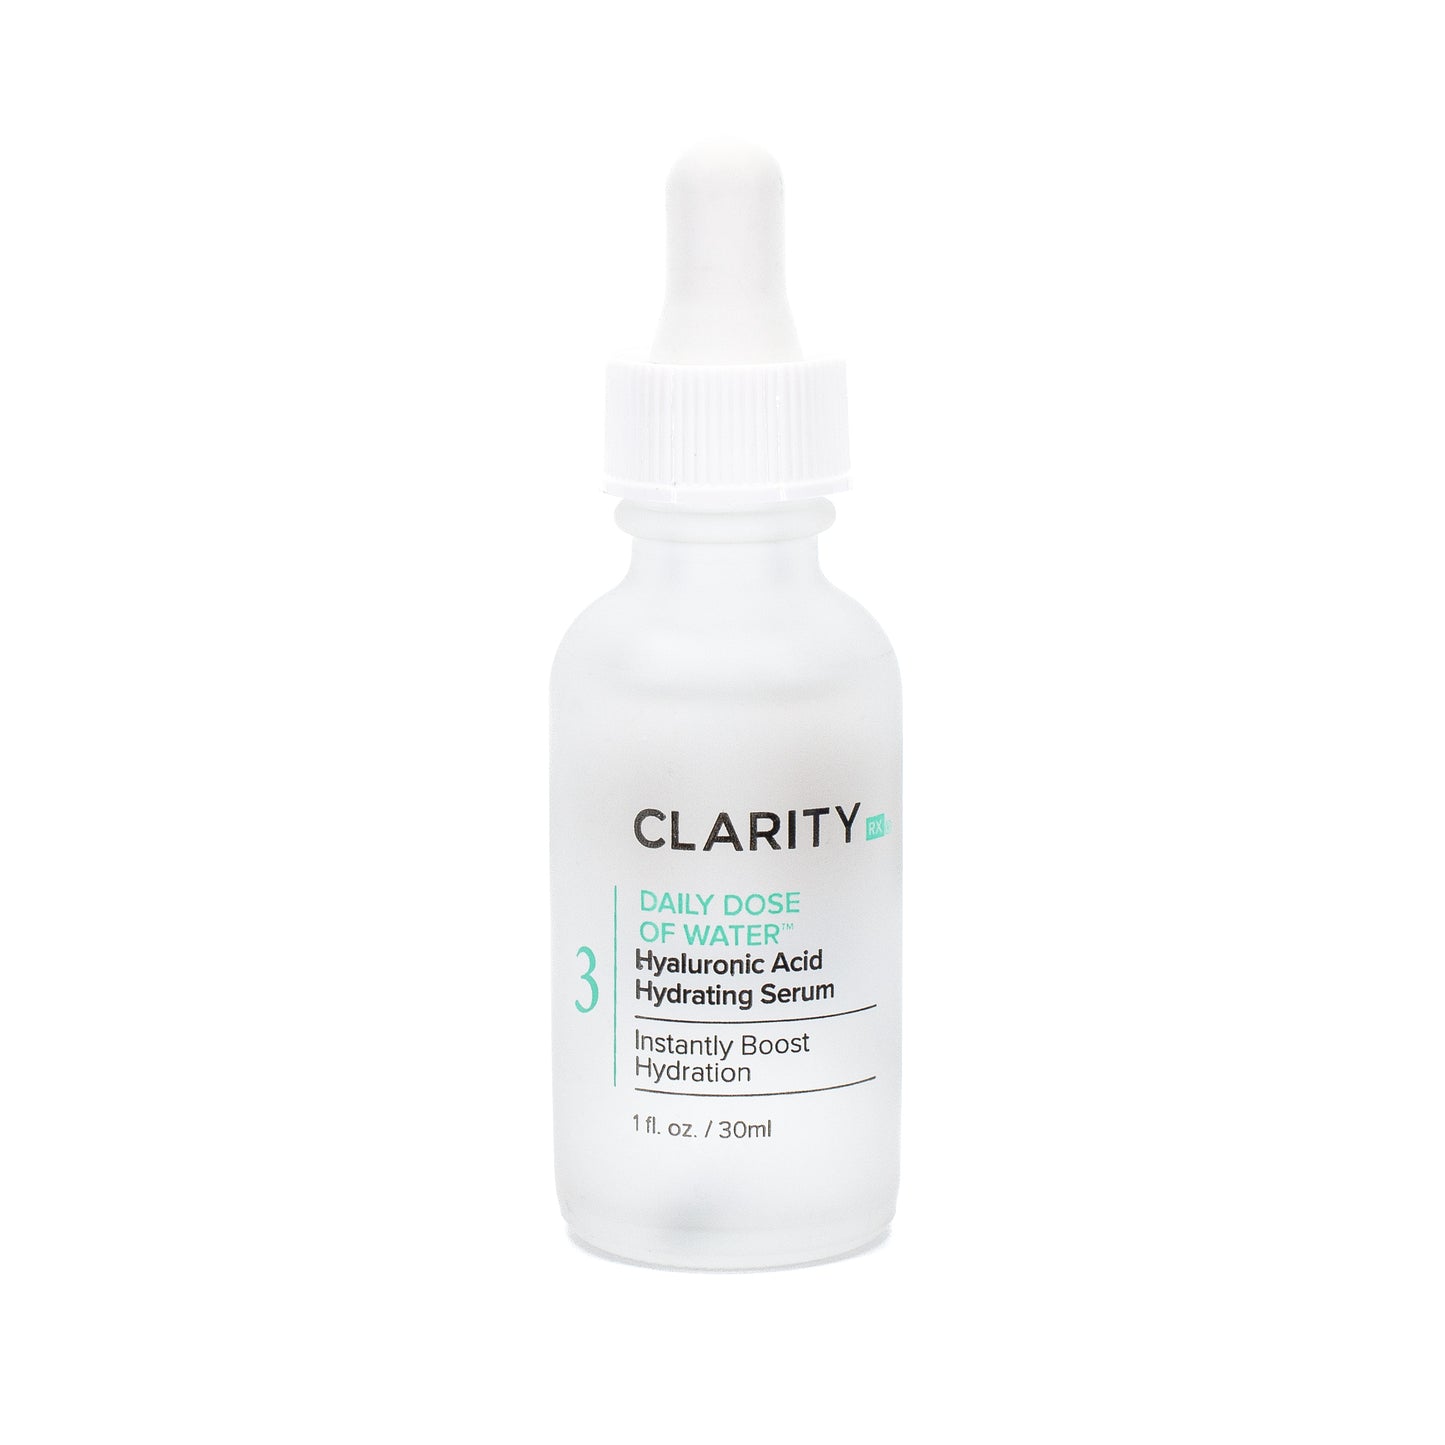 CLARITY RX Daily Dose of Water Hyaluronic Acid Hydrating Serum 1oz - Small Amount Missing